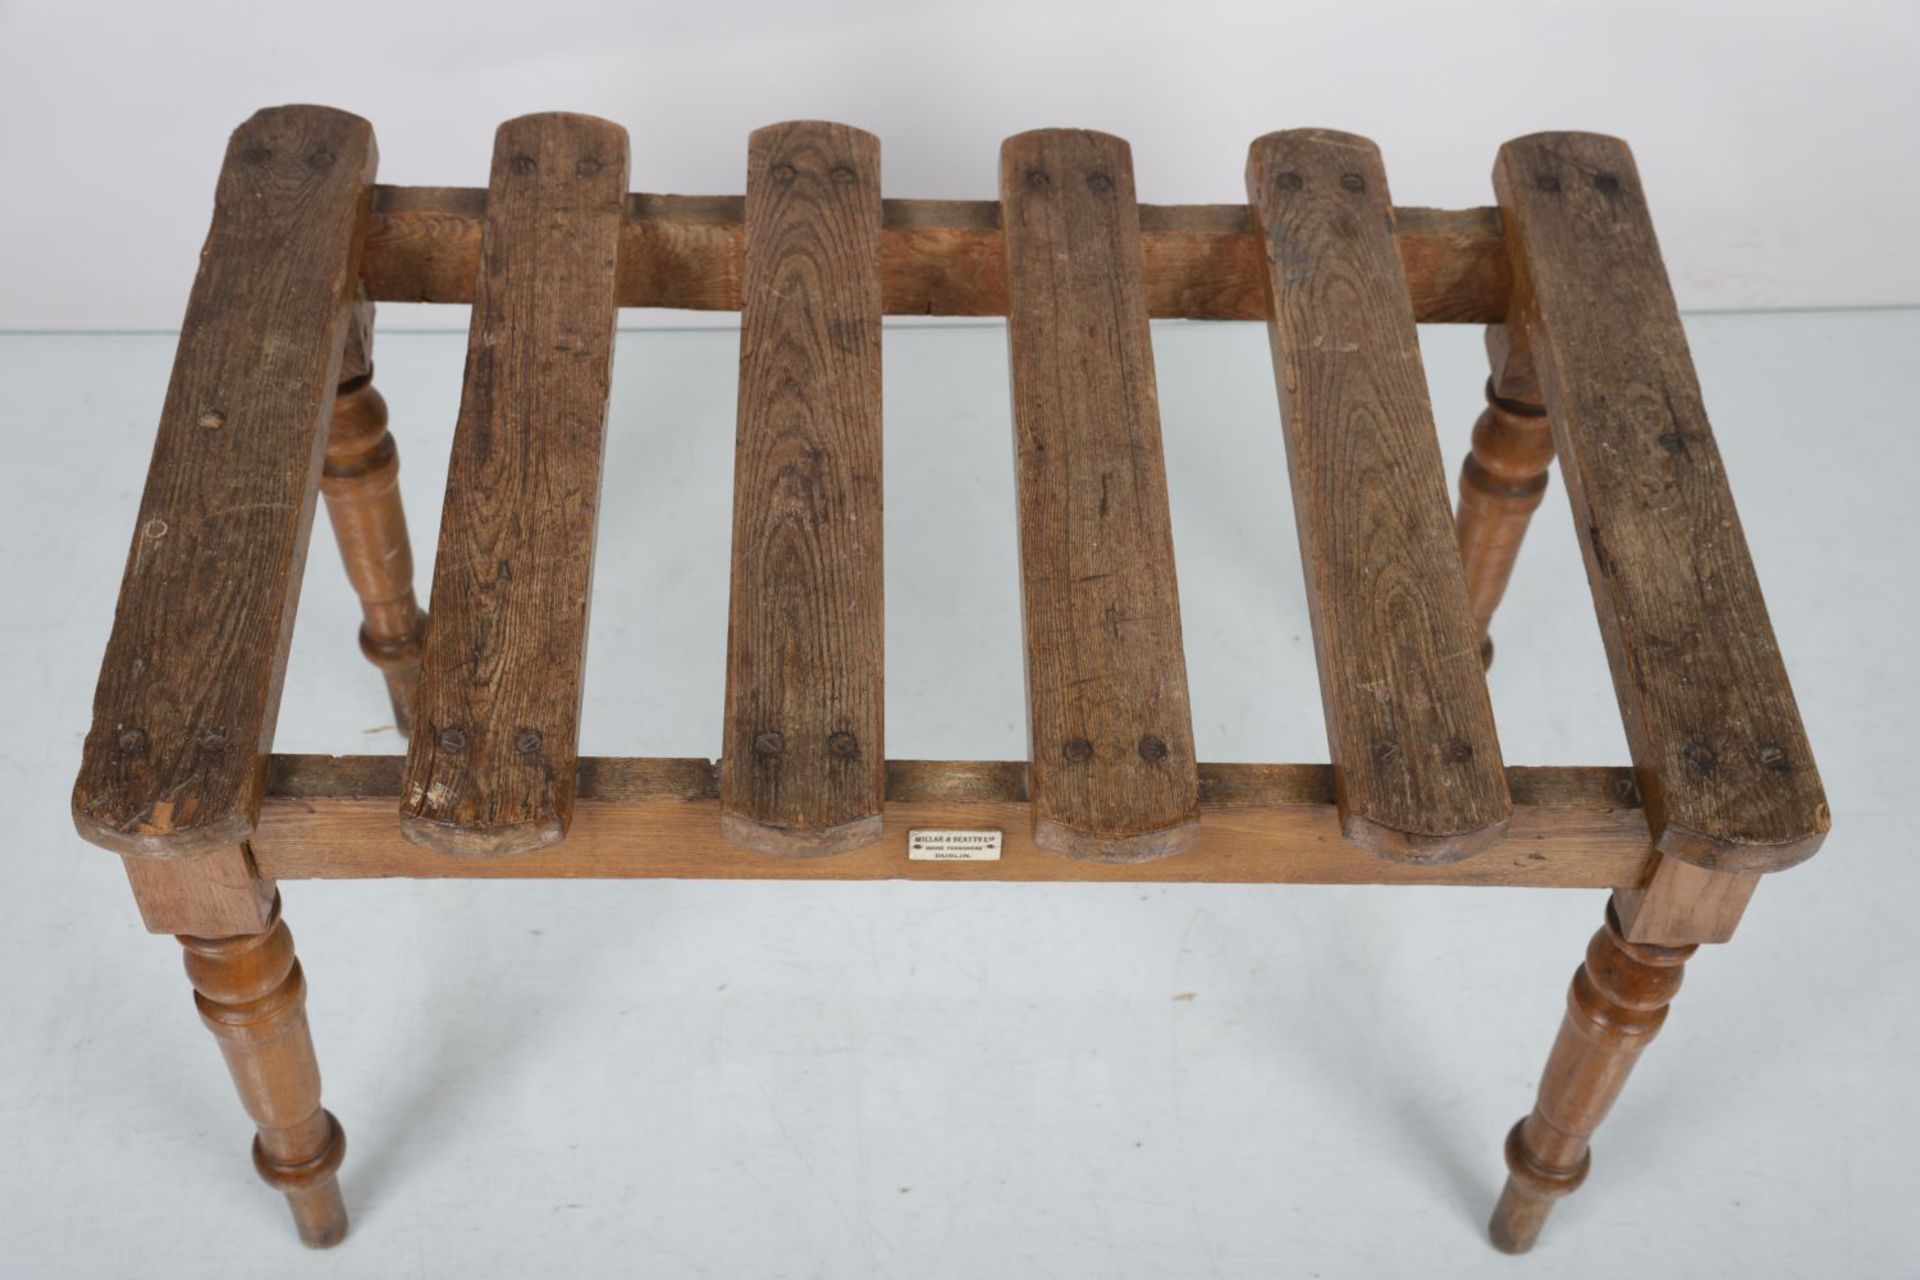 19TH-CENTURY OAK LUGGAGE STAND - Image 4 of 4